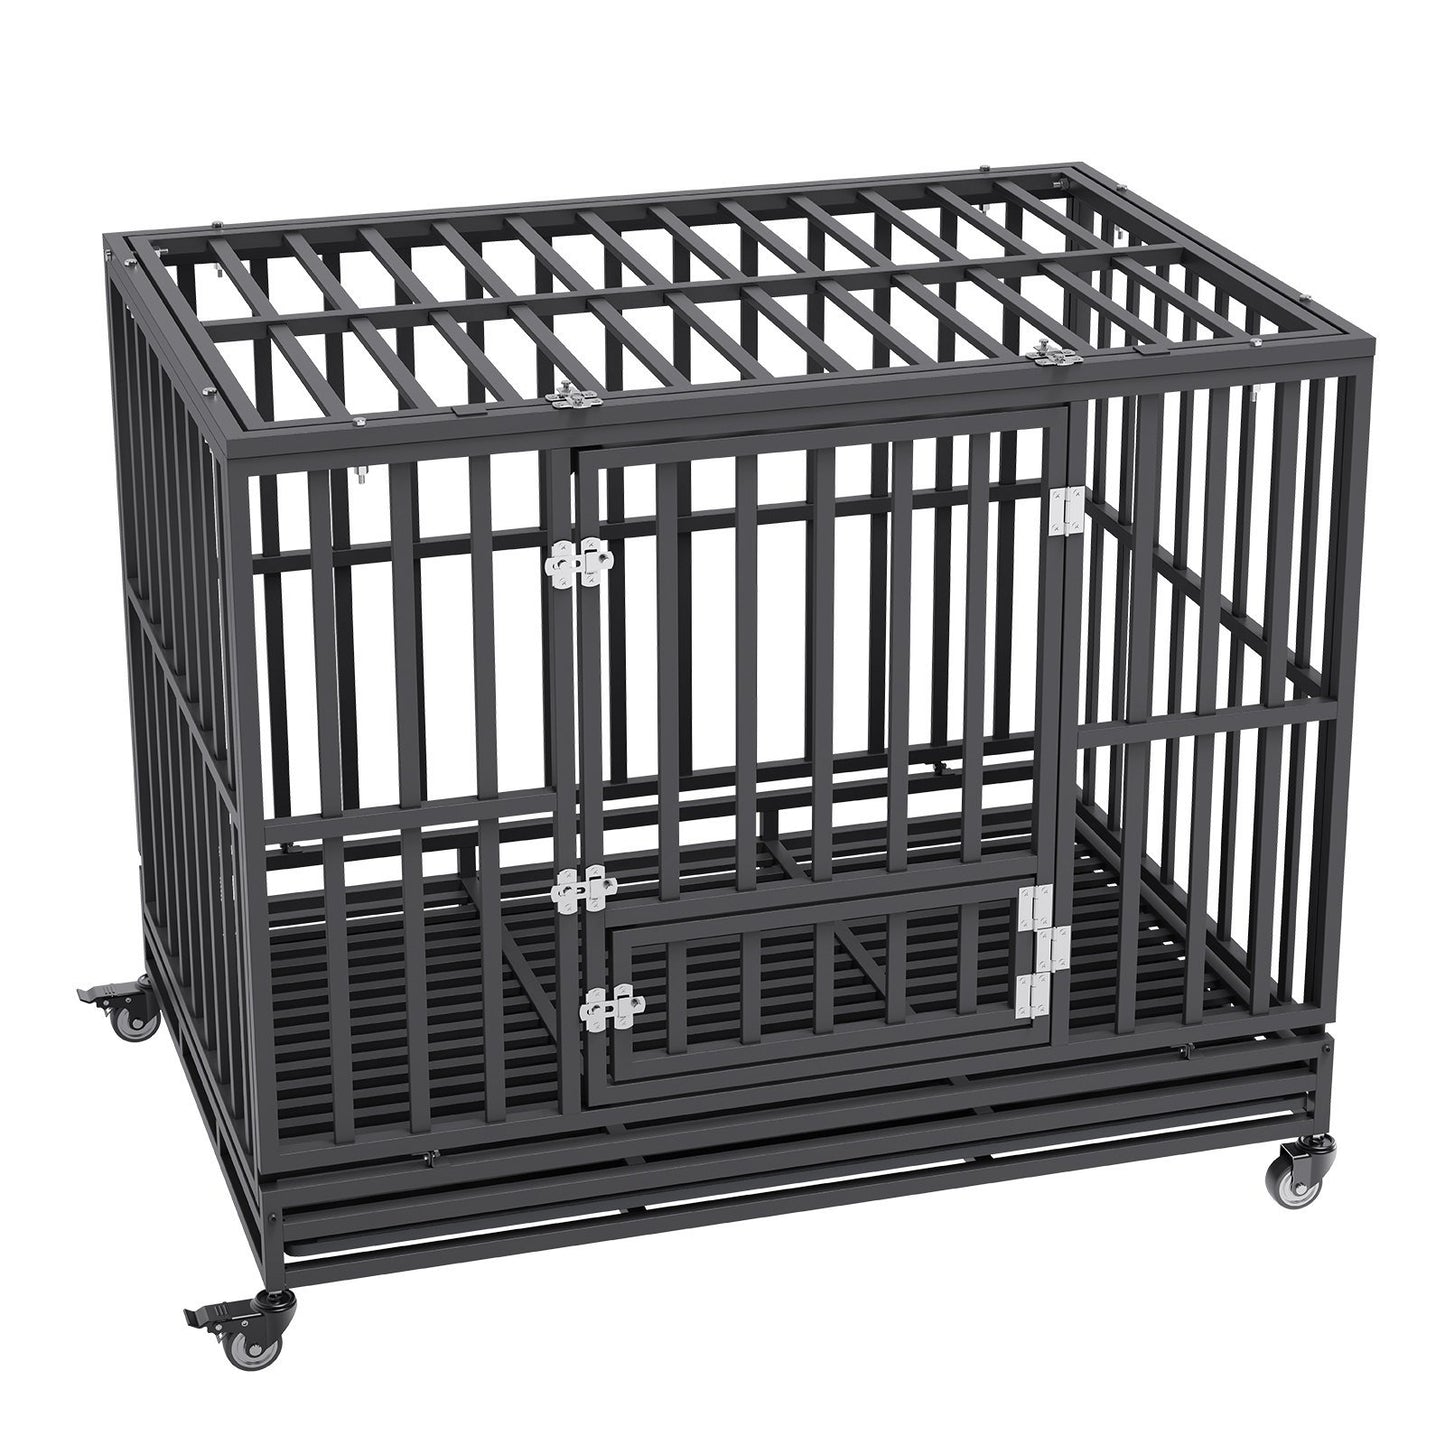 47 Inch Heavy Duty Dog Crate, Indestructible Dog Crate, 3-Door Heavy Duty Dog Kennel for Medium to Large Dogs with Lockable Wheels and Removable Tray, High Anxiety Dog Crate for Indoor & Outdoor